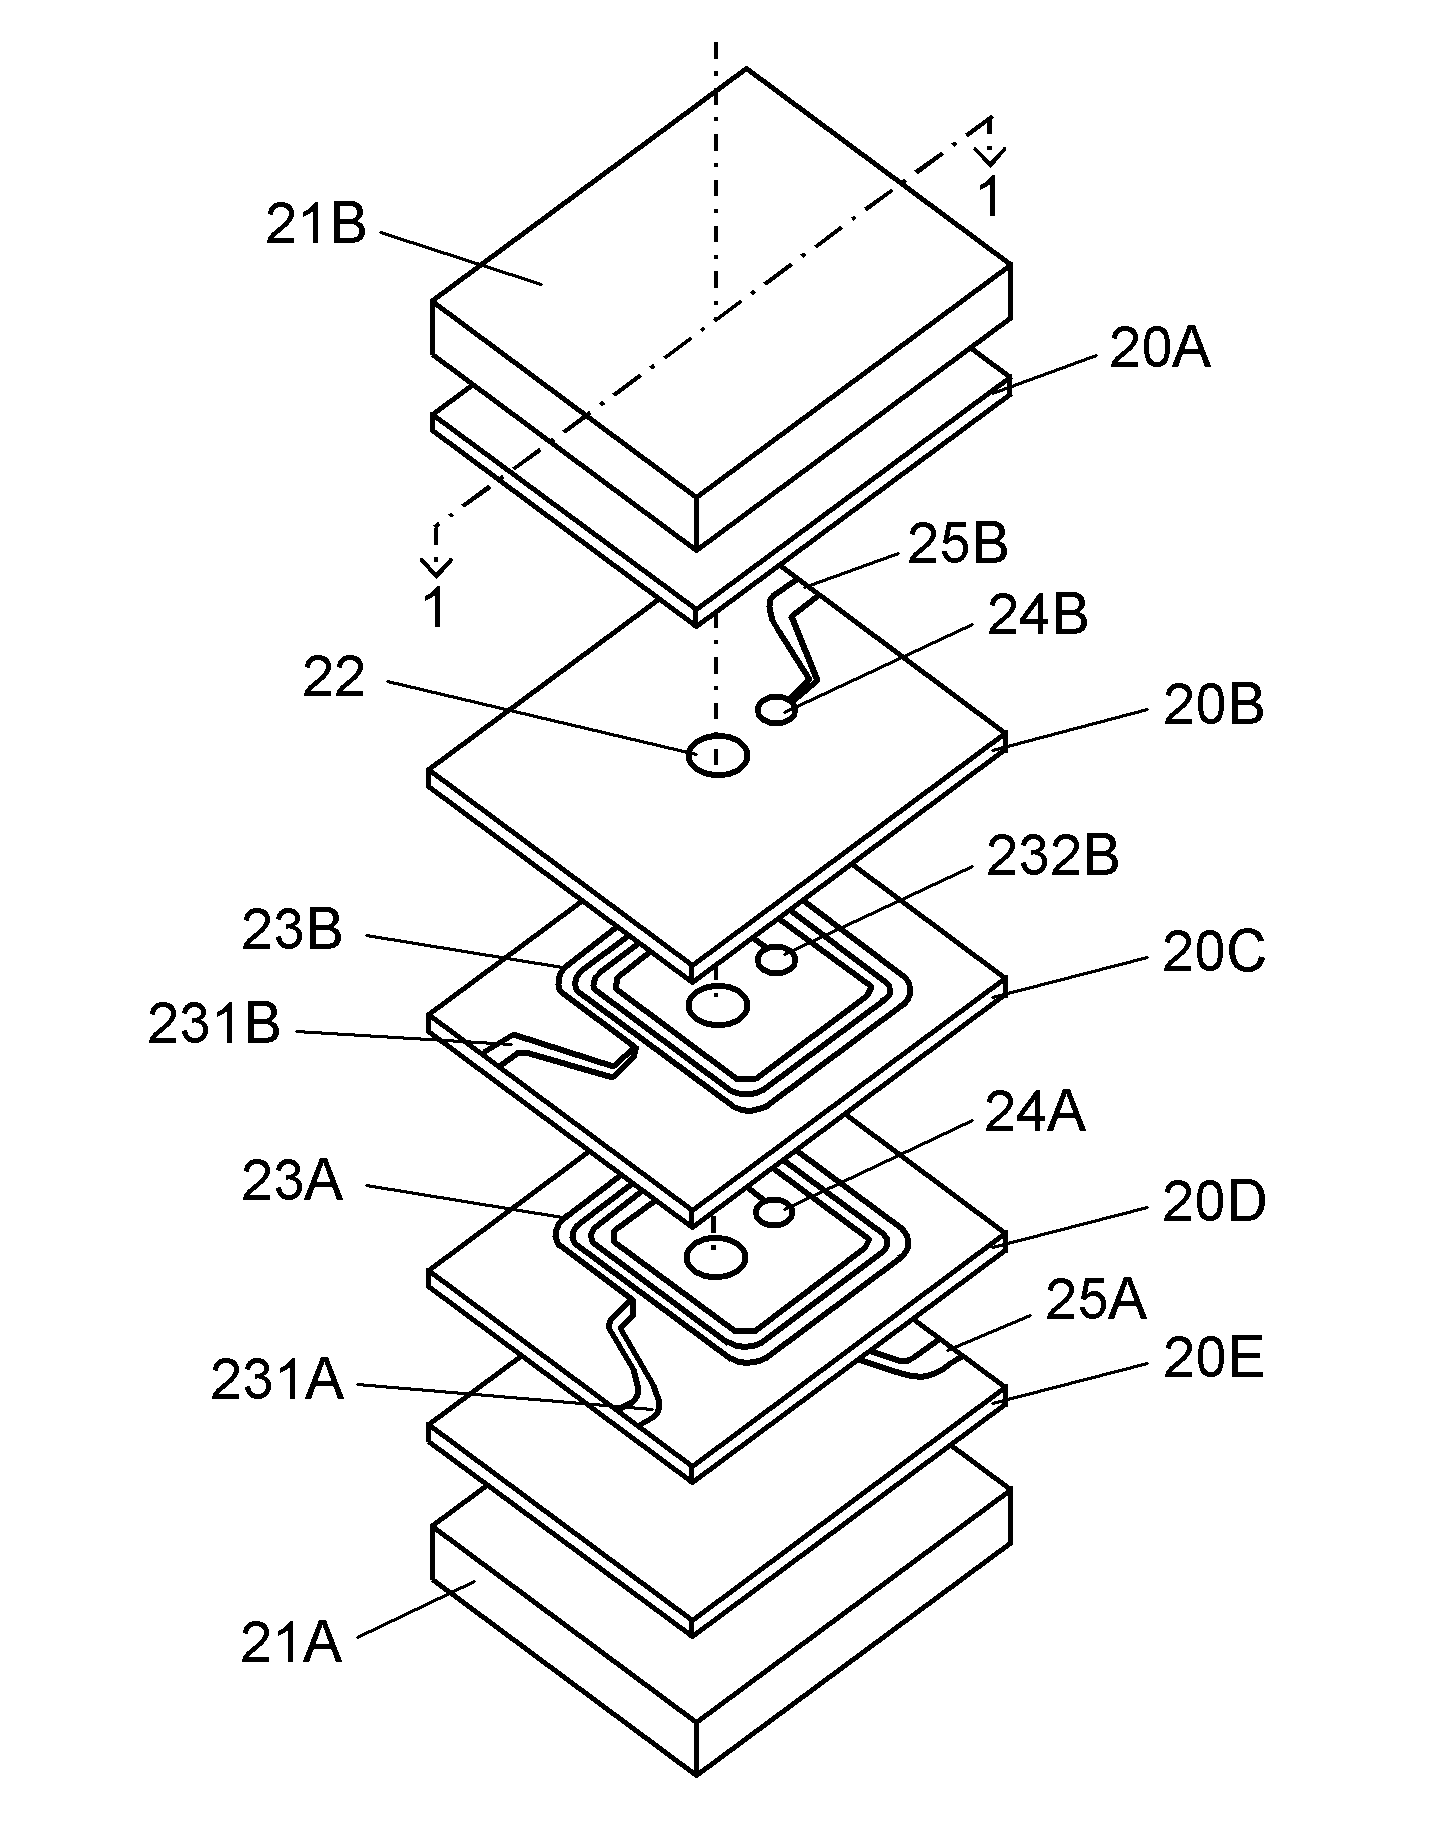 Multilayered ceramic component and manufacturing method thereof